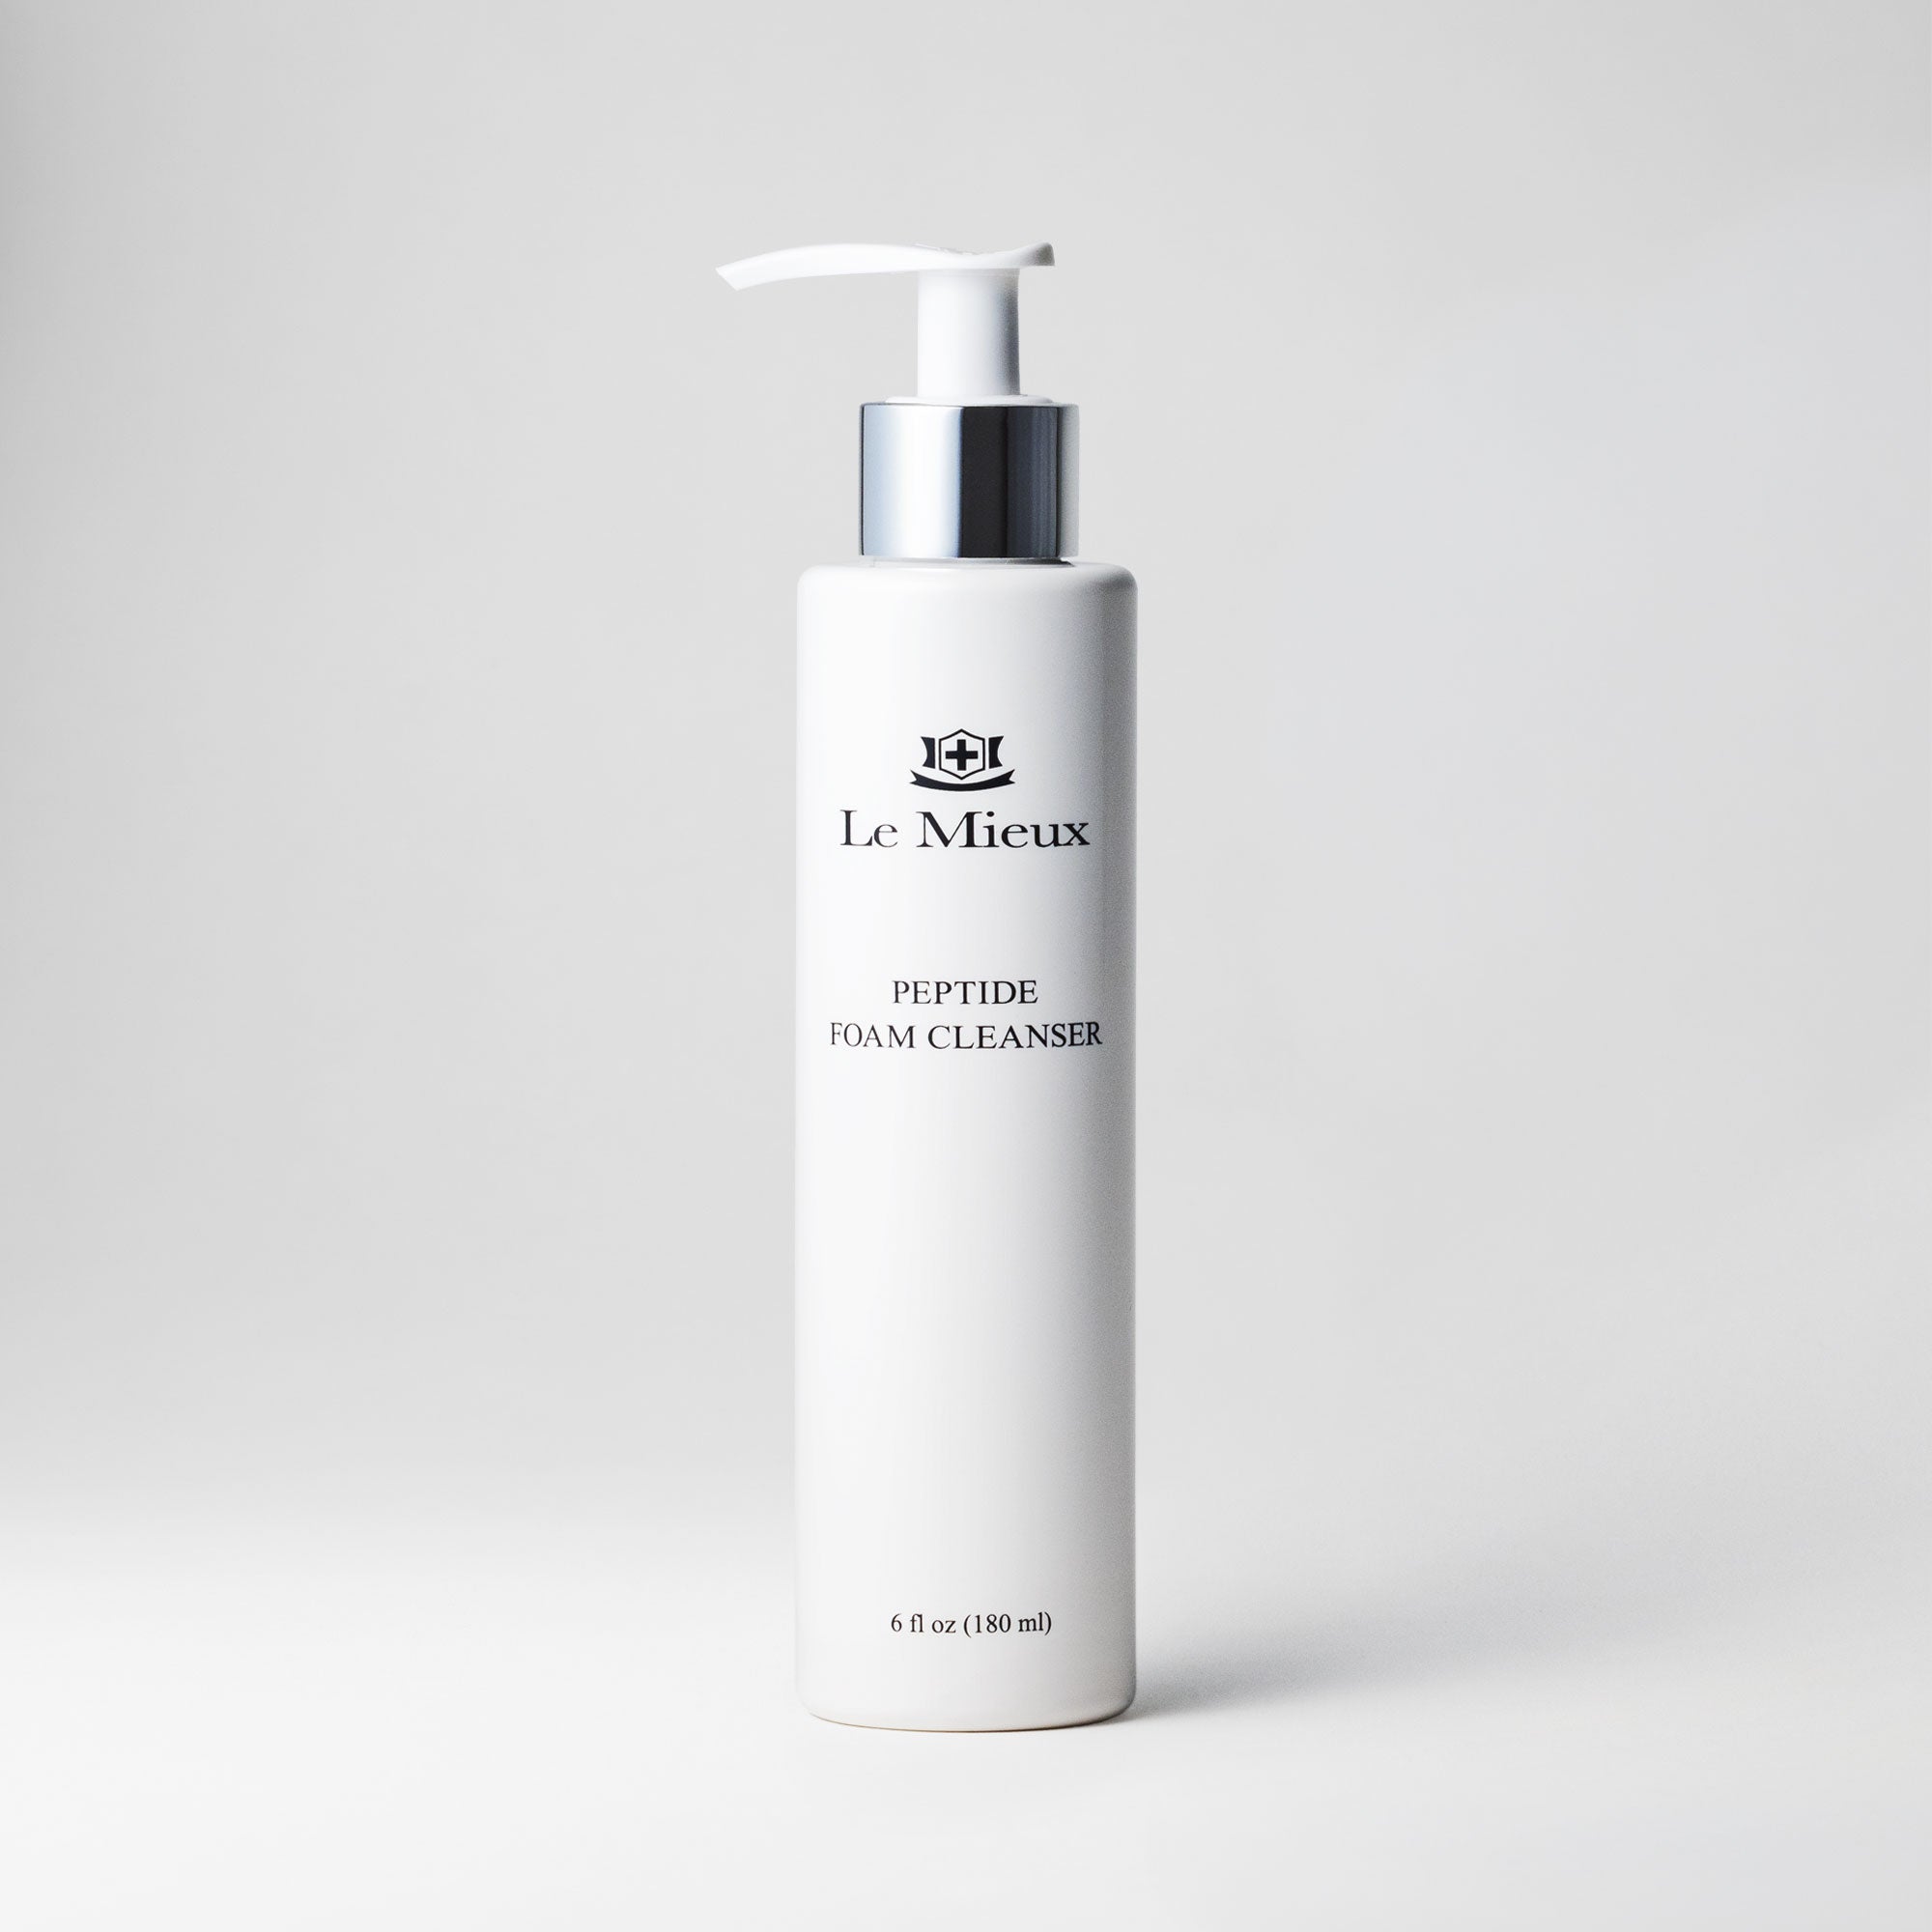  PEPTIDE FOAM CLEANSER from Le Mieux Skincare - featured